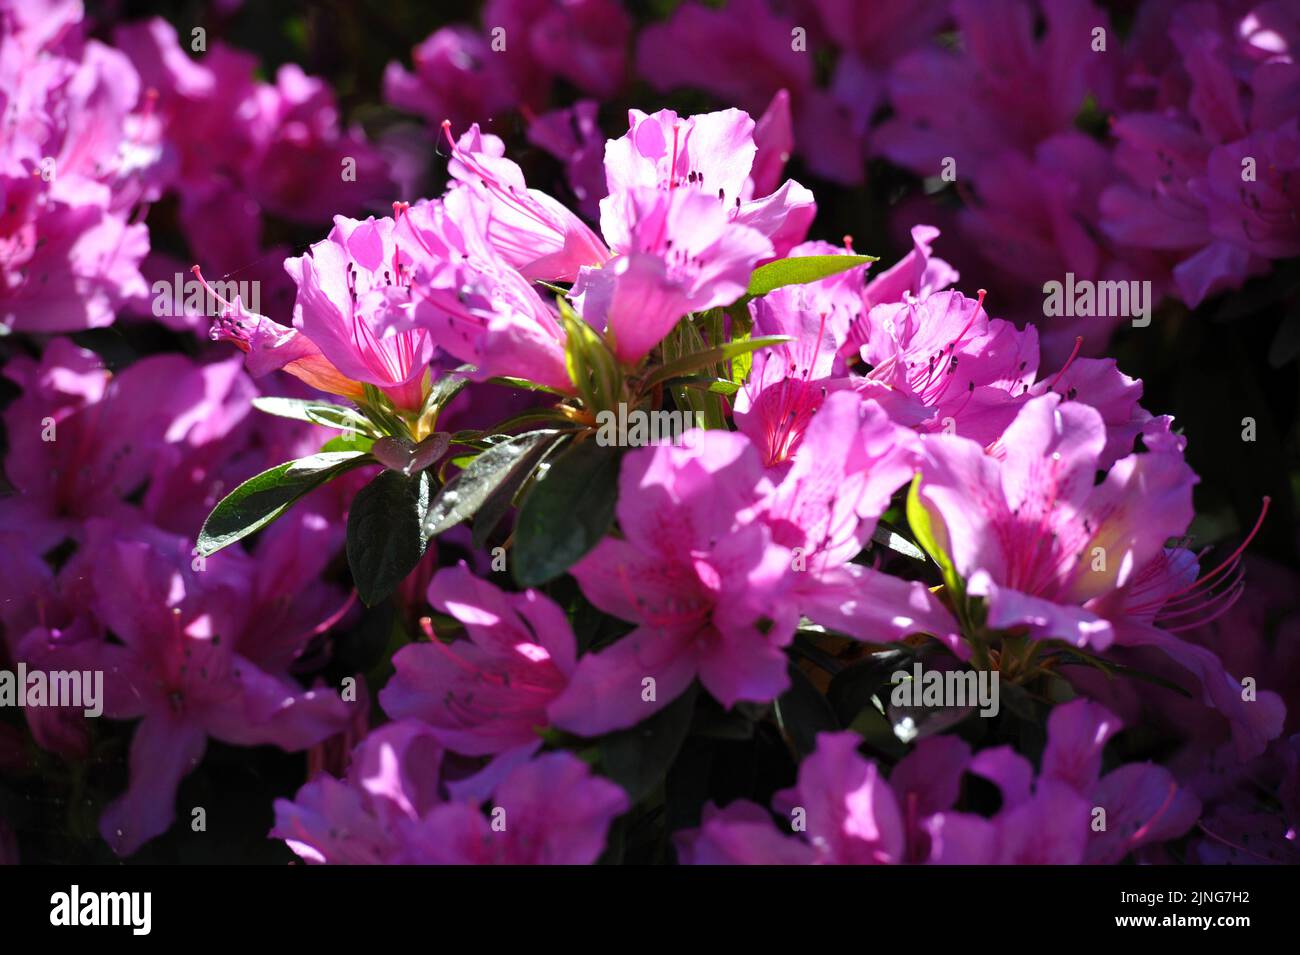 Flowers, Rhododendron. Stock Photo